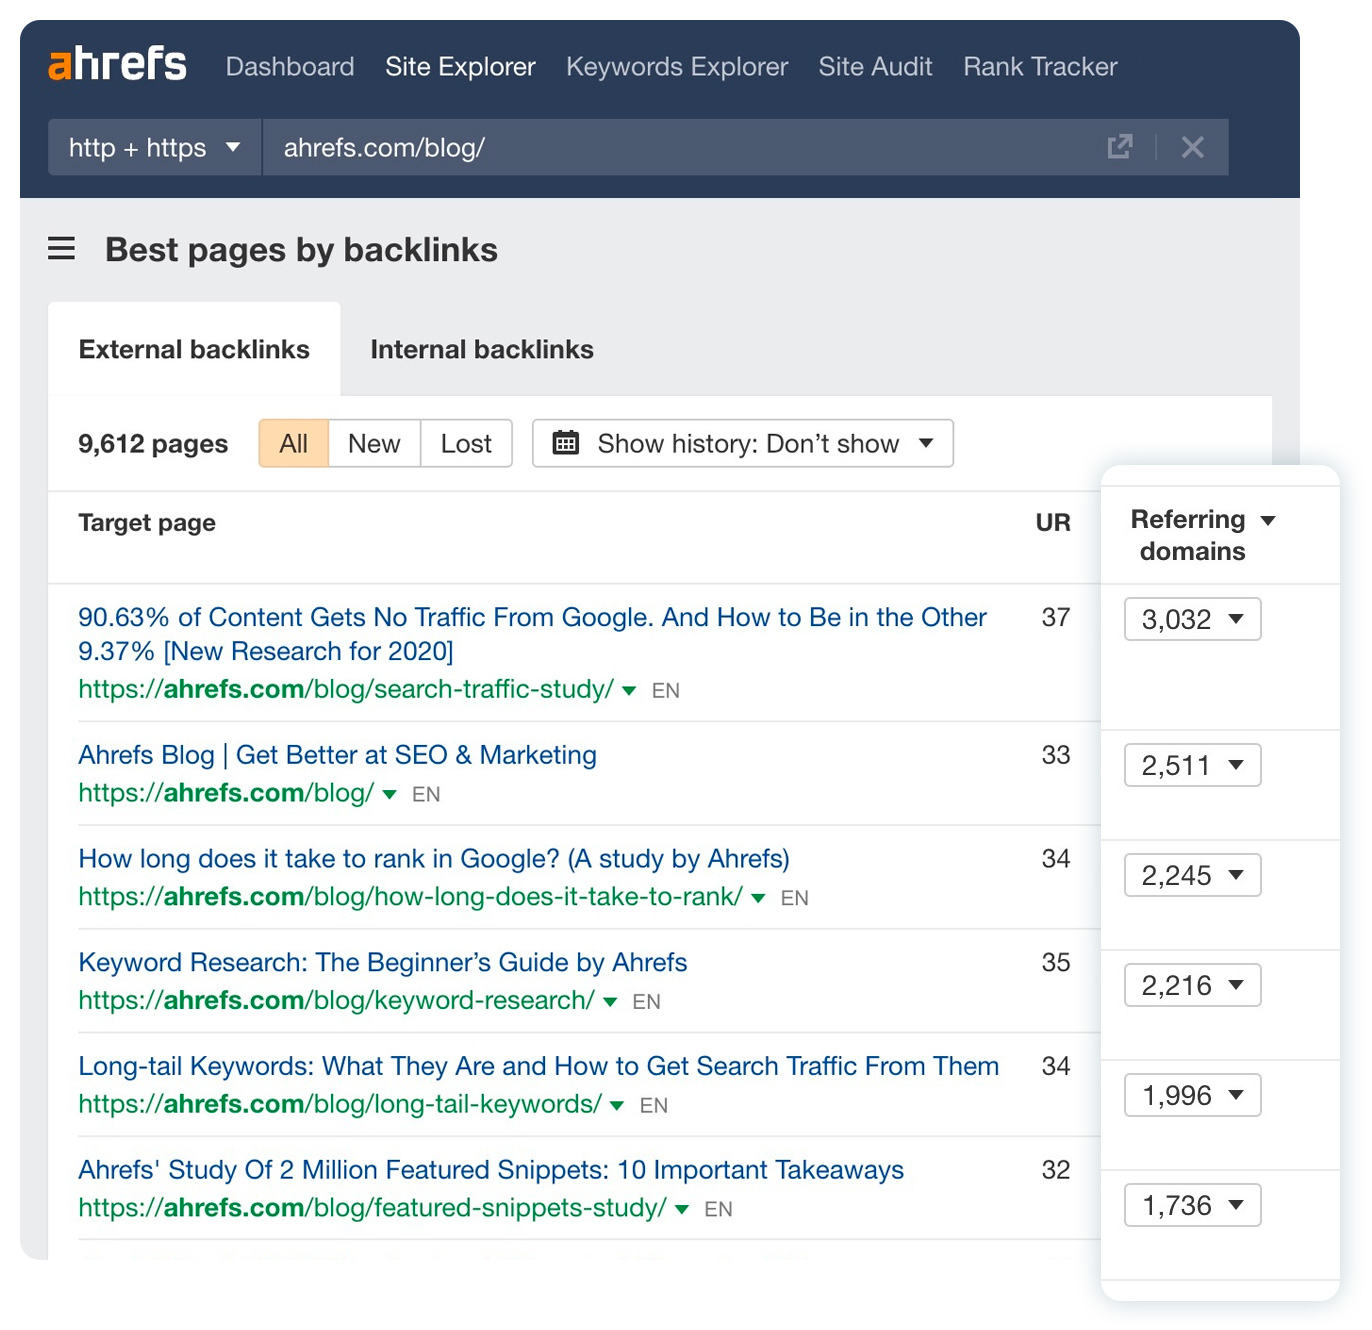 Best pages by backlinks report